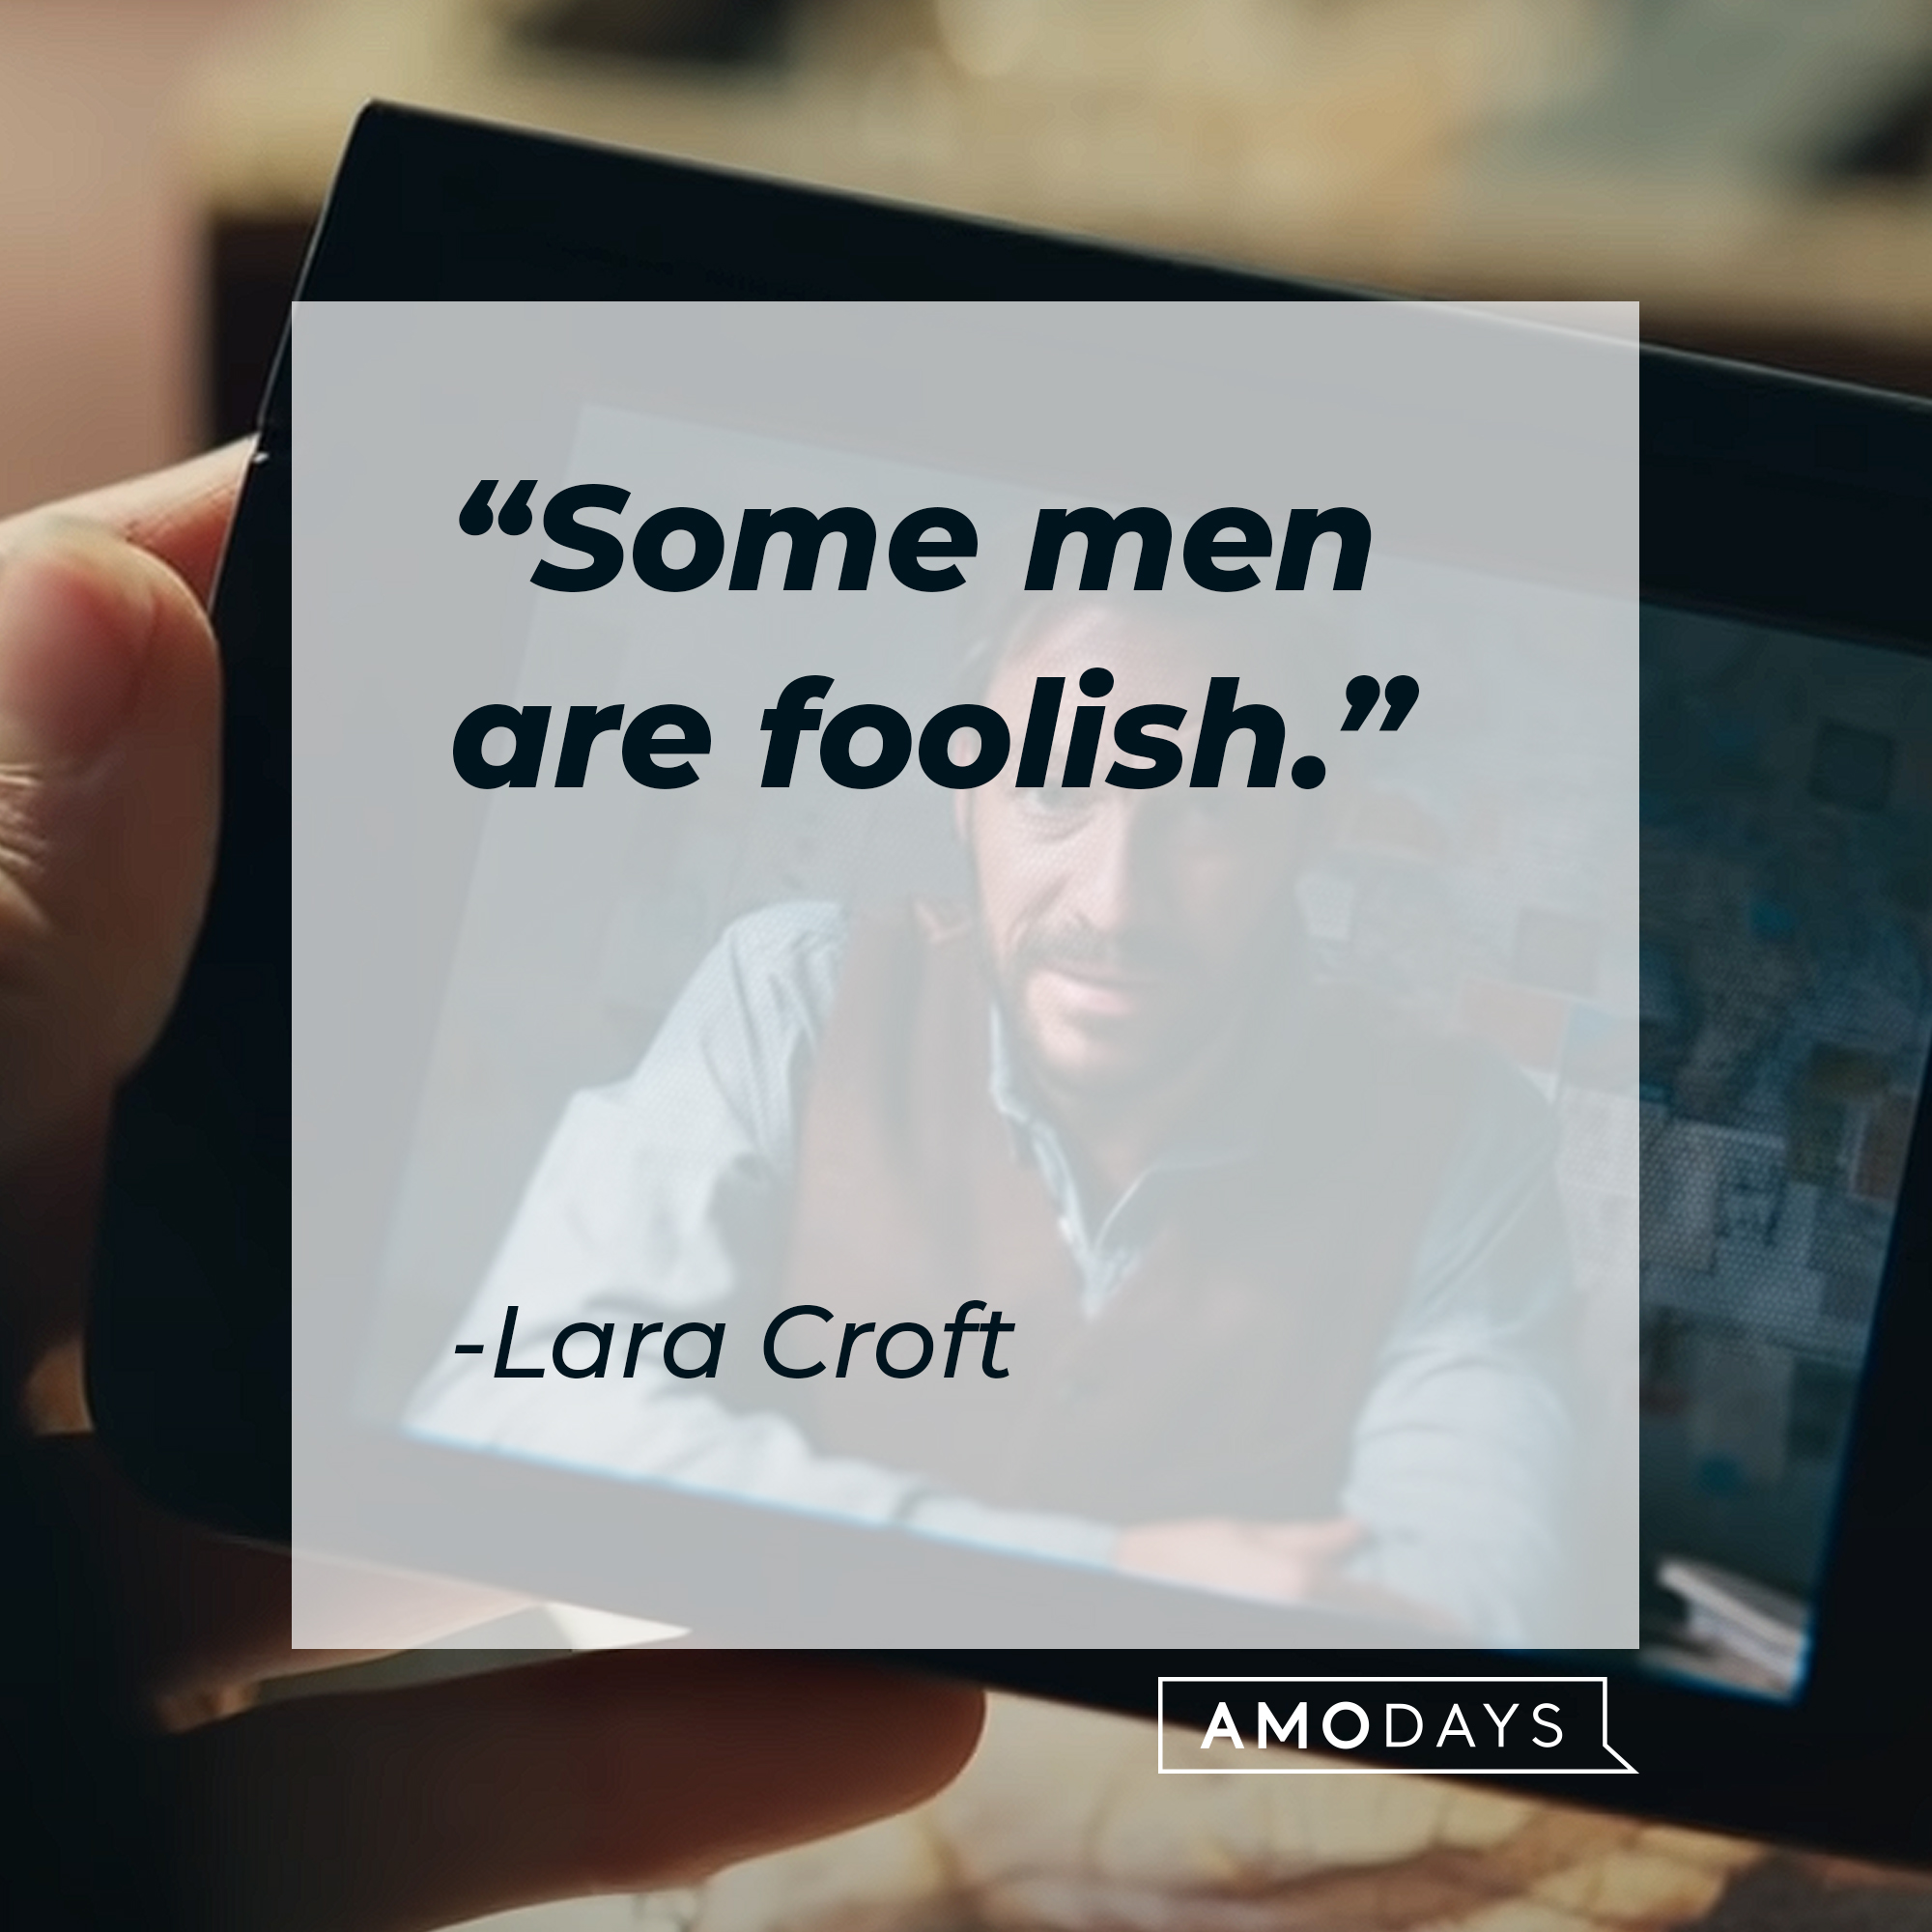 An image of Alicia Vikander’s Lara Croft with her quote: “Some men are foolish.” | Source: youtube.com/WarnerBrosPictures